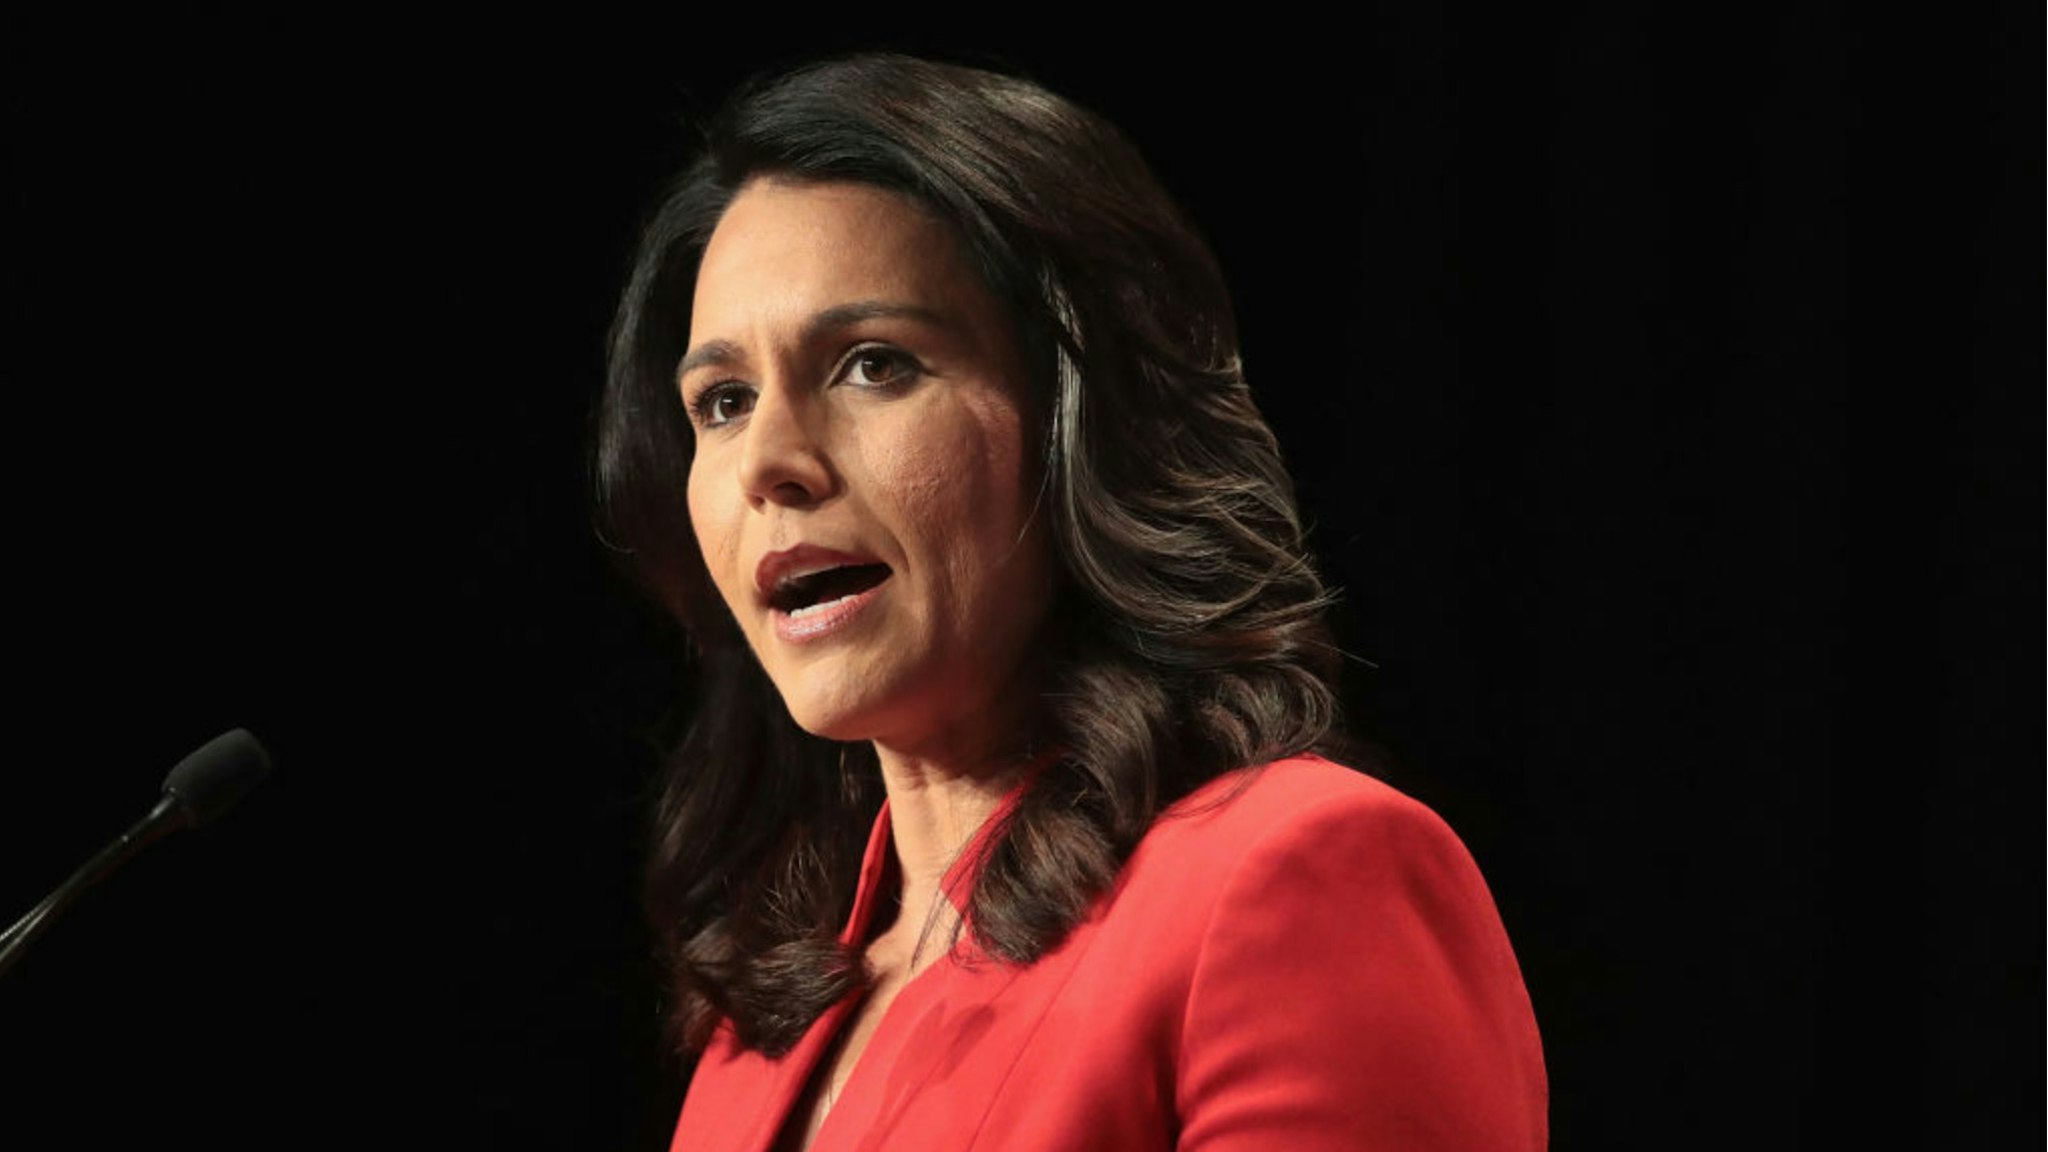 Democratic presidential candidate and Hawaii congresswoman Tulsi Gabbard speaks at the Iowa Democratic Party's Hall of Fame Dinner on June 9, 2019 in Cedar Rapids, Iowa.